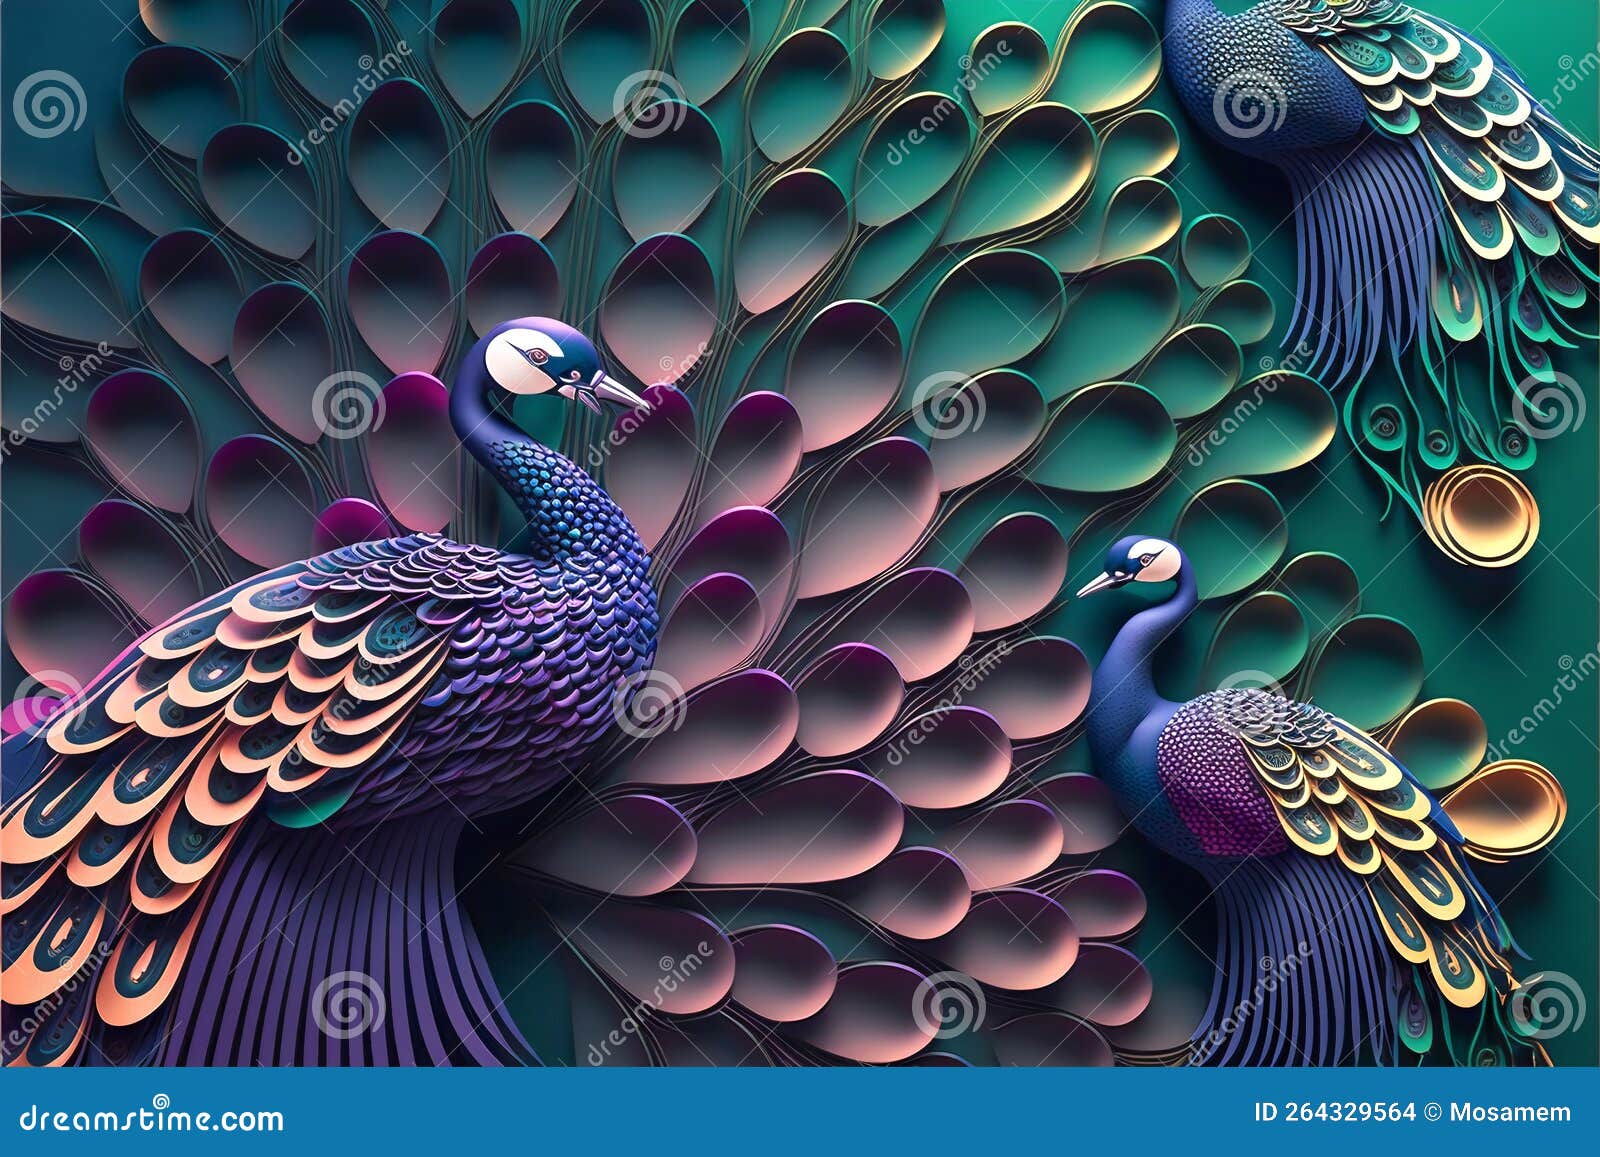 Peacock Wallpapers Download | MobCup